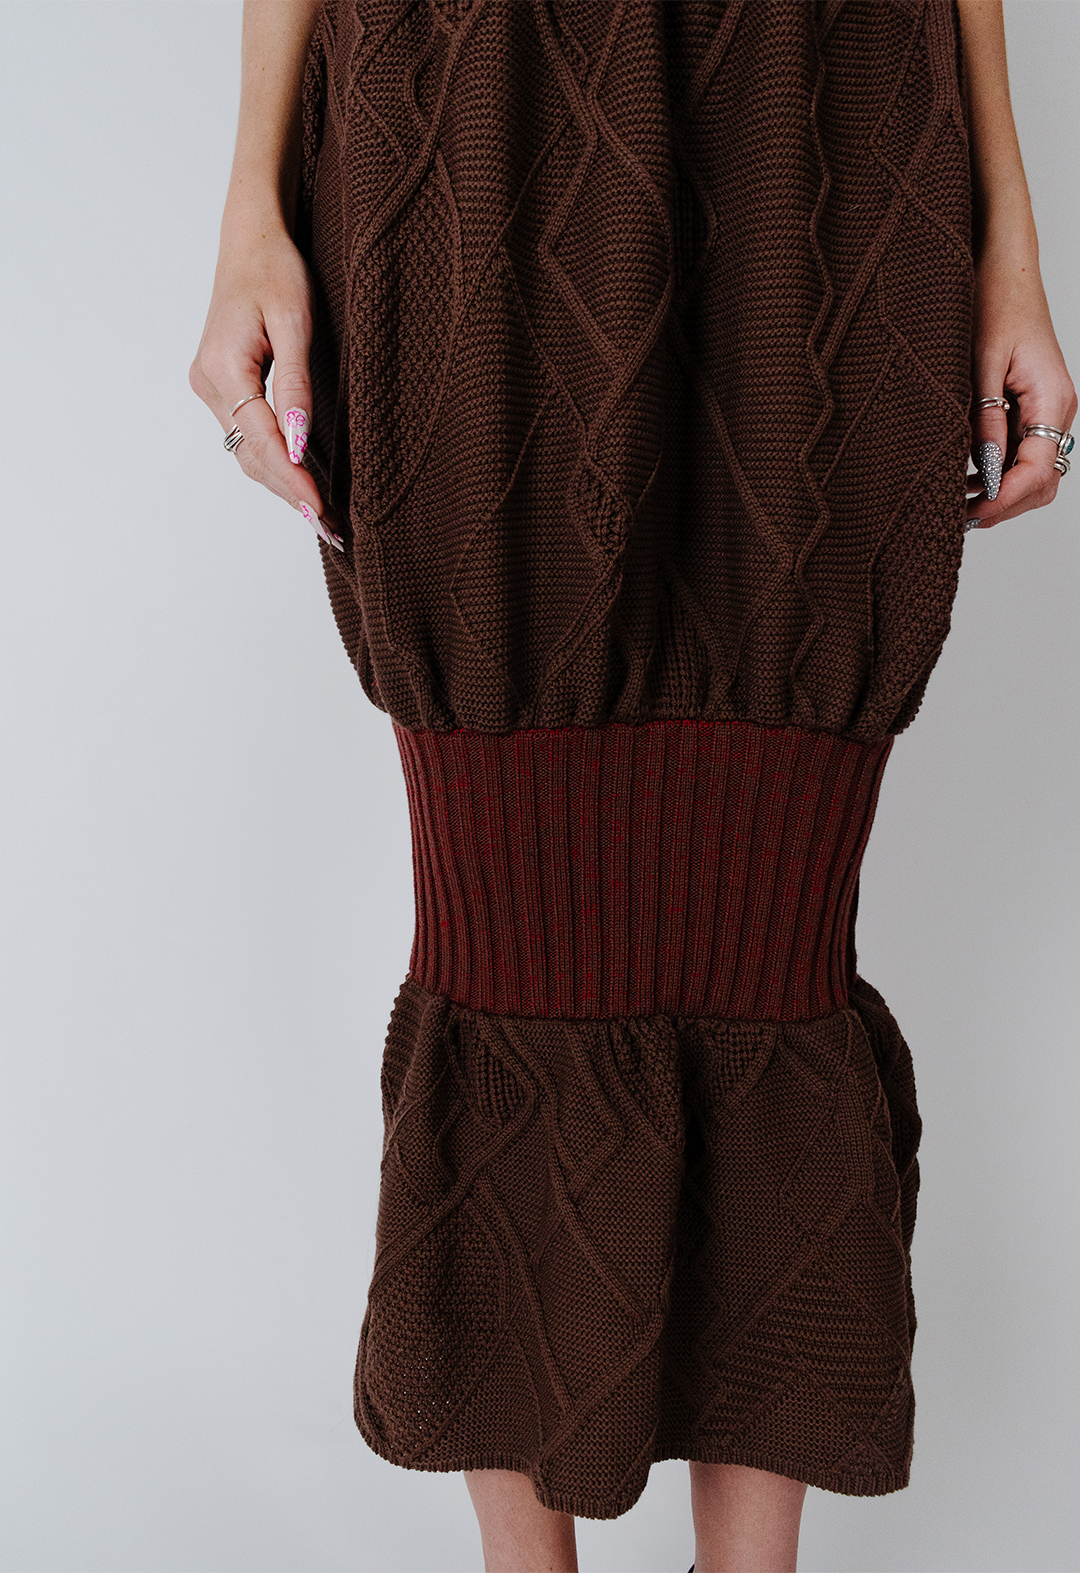 This is a close-up image of the balloon skirt. The model's hands are to her sides. The brown balloon skirt is filled with Aran cables running through it, allowing you to see the mix of colors in the rib. There is a mixture of red and brown on the rib section on the knees. 